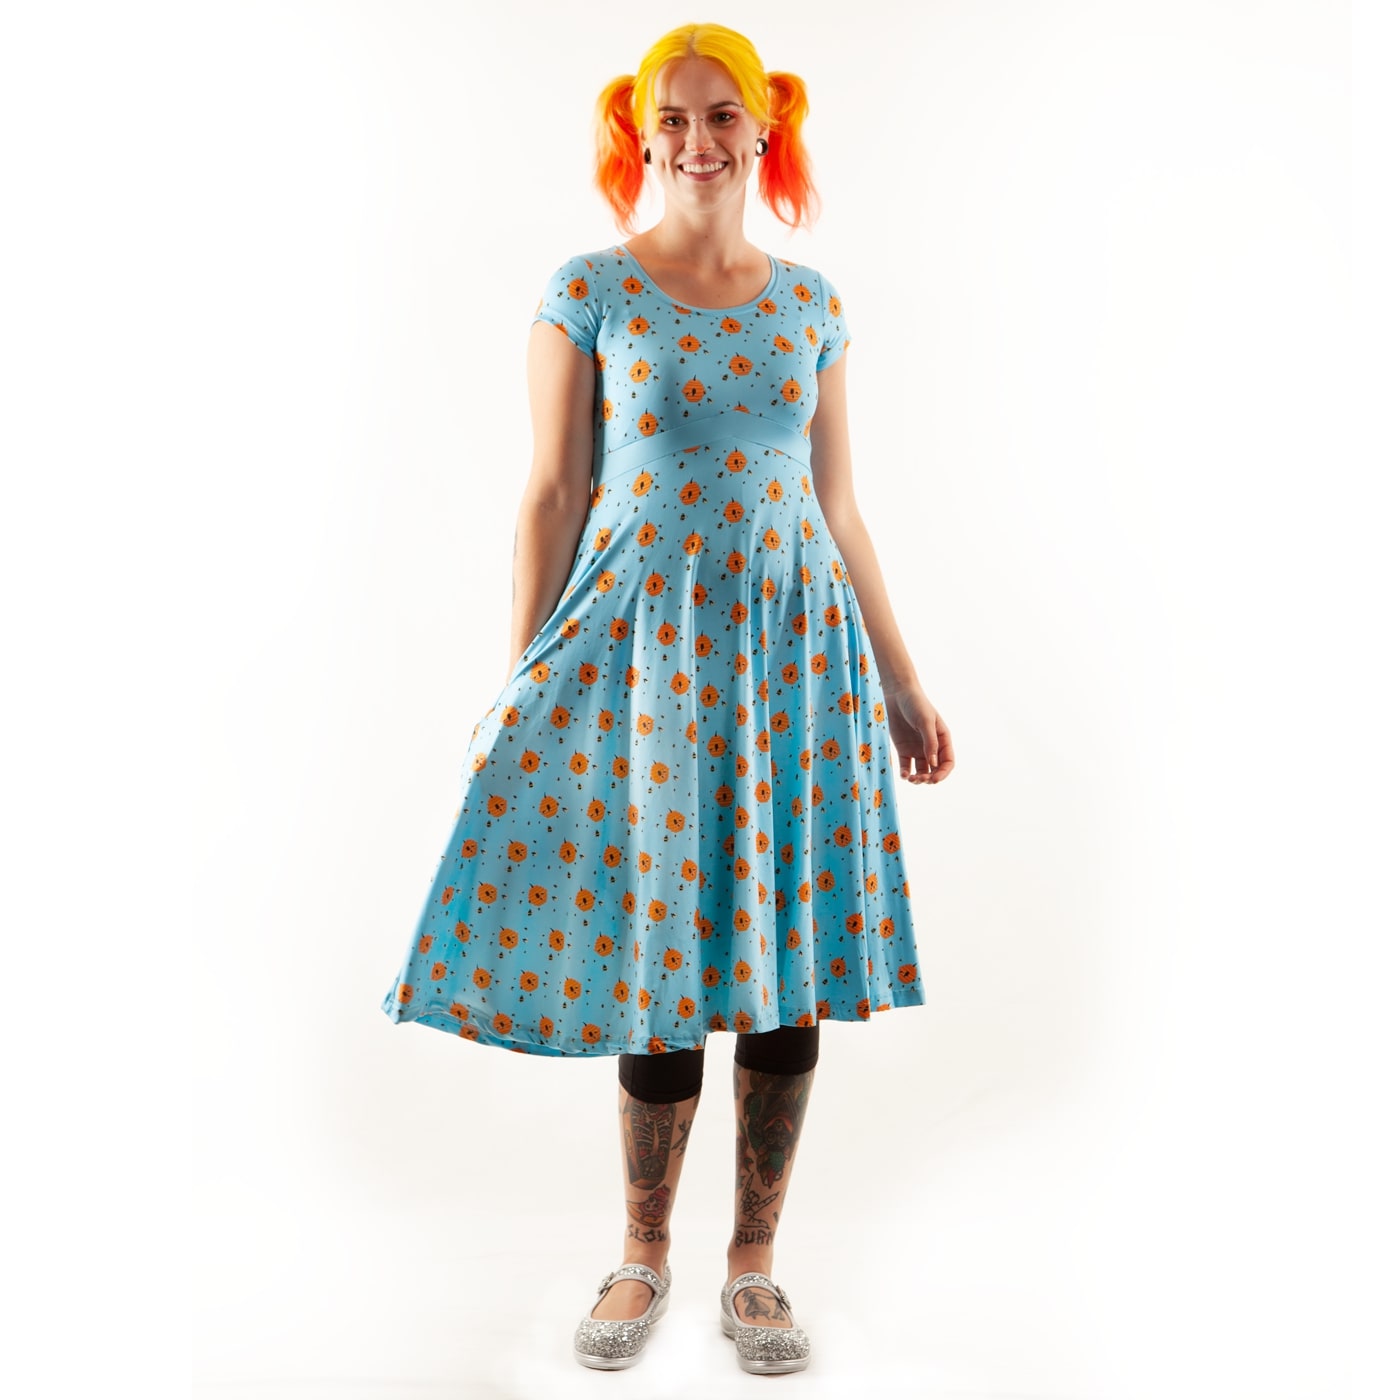 Hive Tea Dress by RainbowsAndFairies.com (Beehive - Bees - Bumblebee - Honey - Dress With Pockets - Rockabilly - Vintage Inspired - Rock & Roll) - SKU: CL_TEADR_BHIVE_ORG - Pic 05